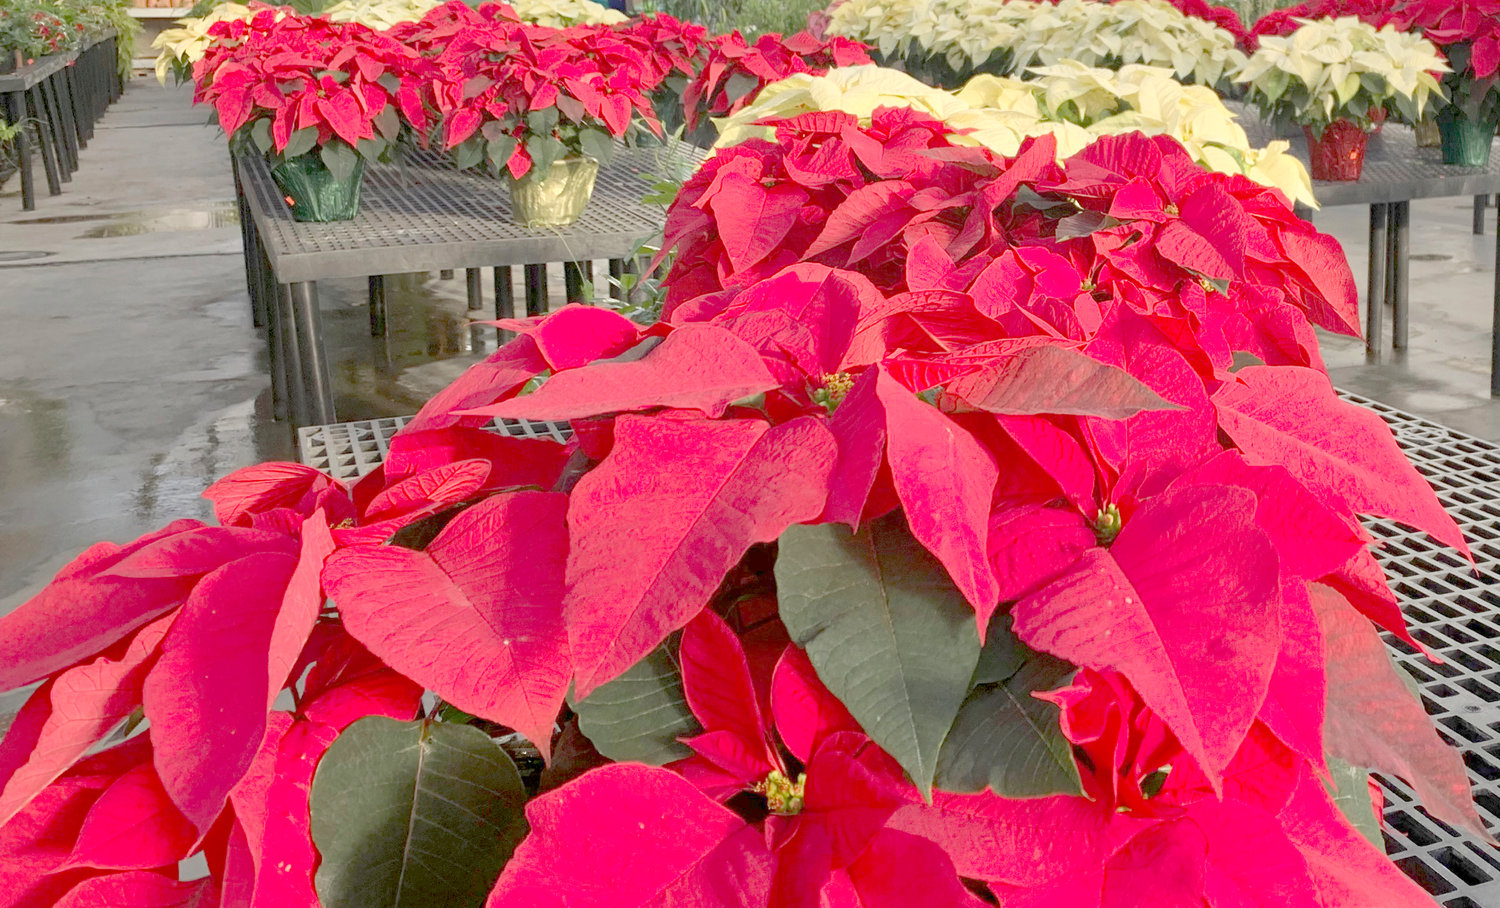 Poinsettias appear on display at a nursery in Larchmont on Monday, Dec. 5. The trick to poinsettias is keeping them alive through the holiday season. That starts with keeping them warm, even on the trip home from the store.